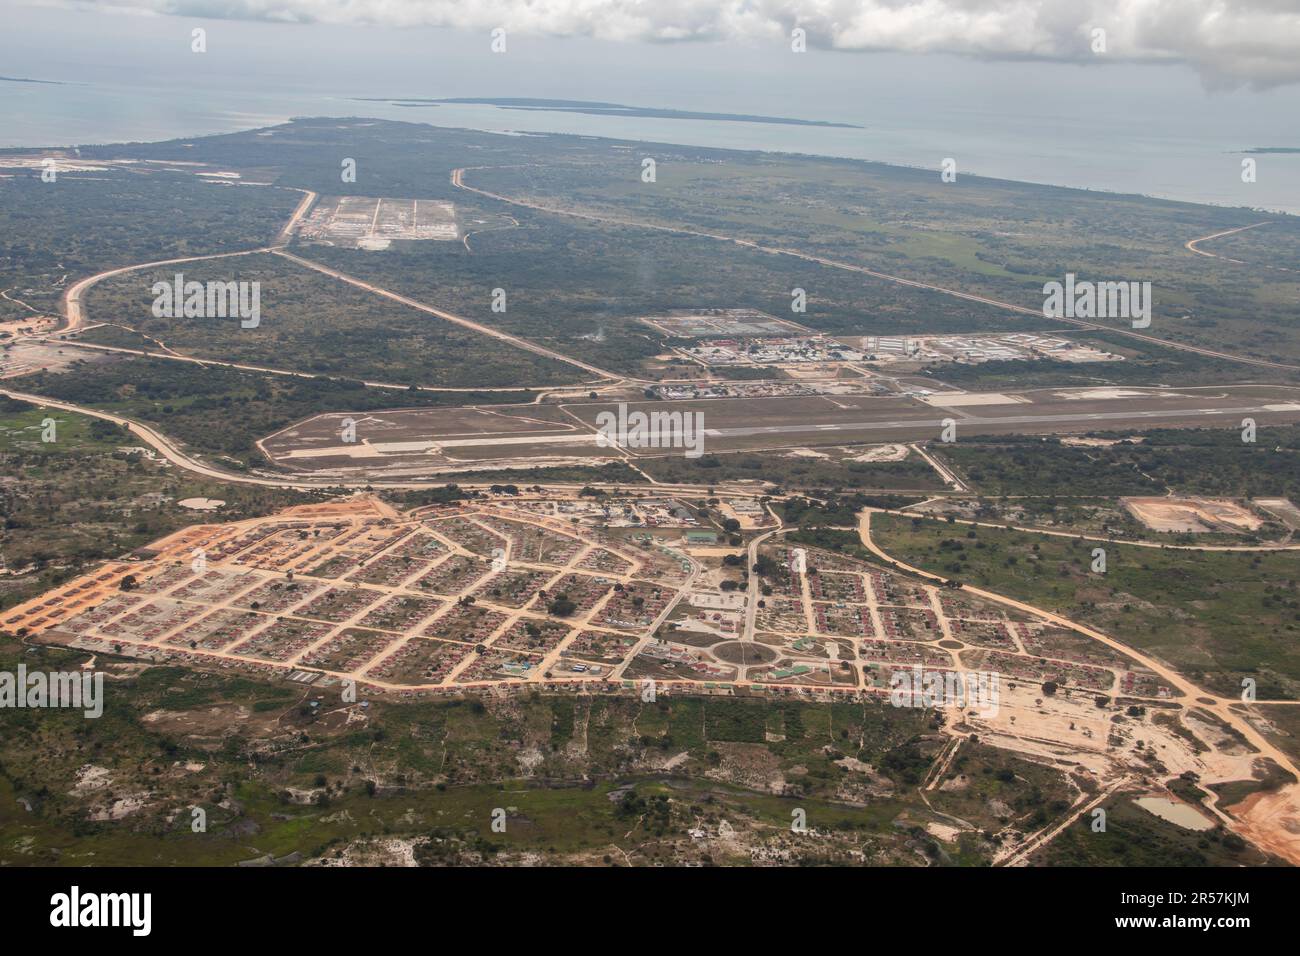 Pemba city, capital of Cabo Delgado province in Mozambique, picture taken from above before landing to Pemba airport Stock Photo